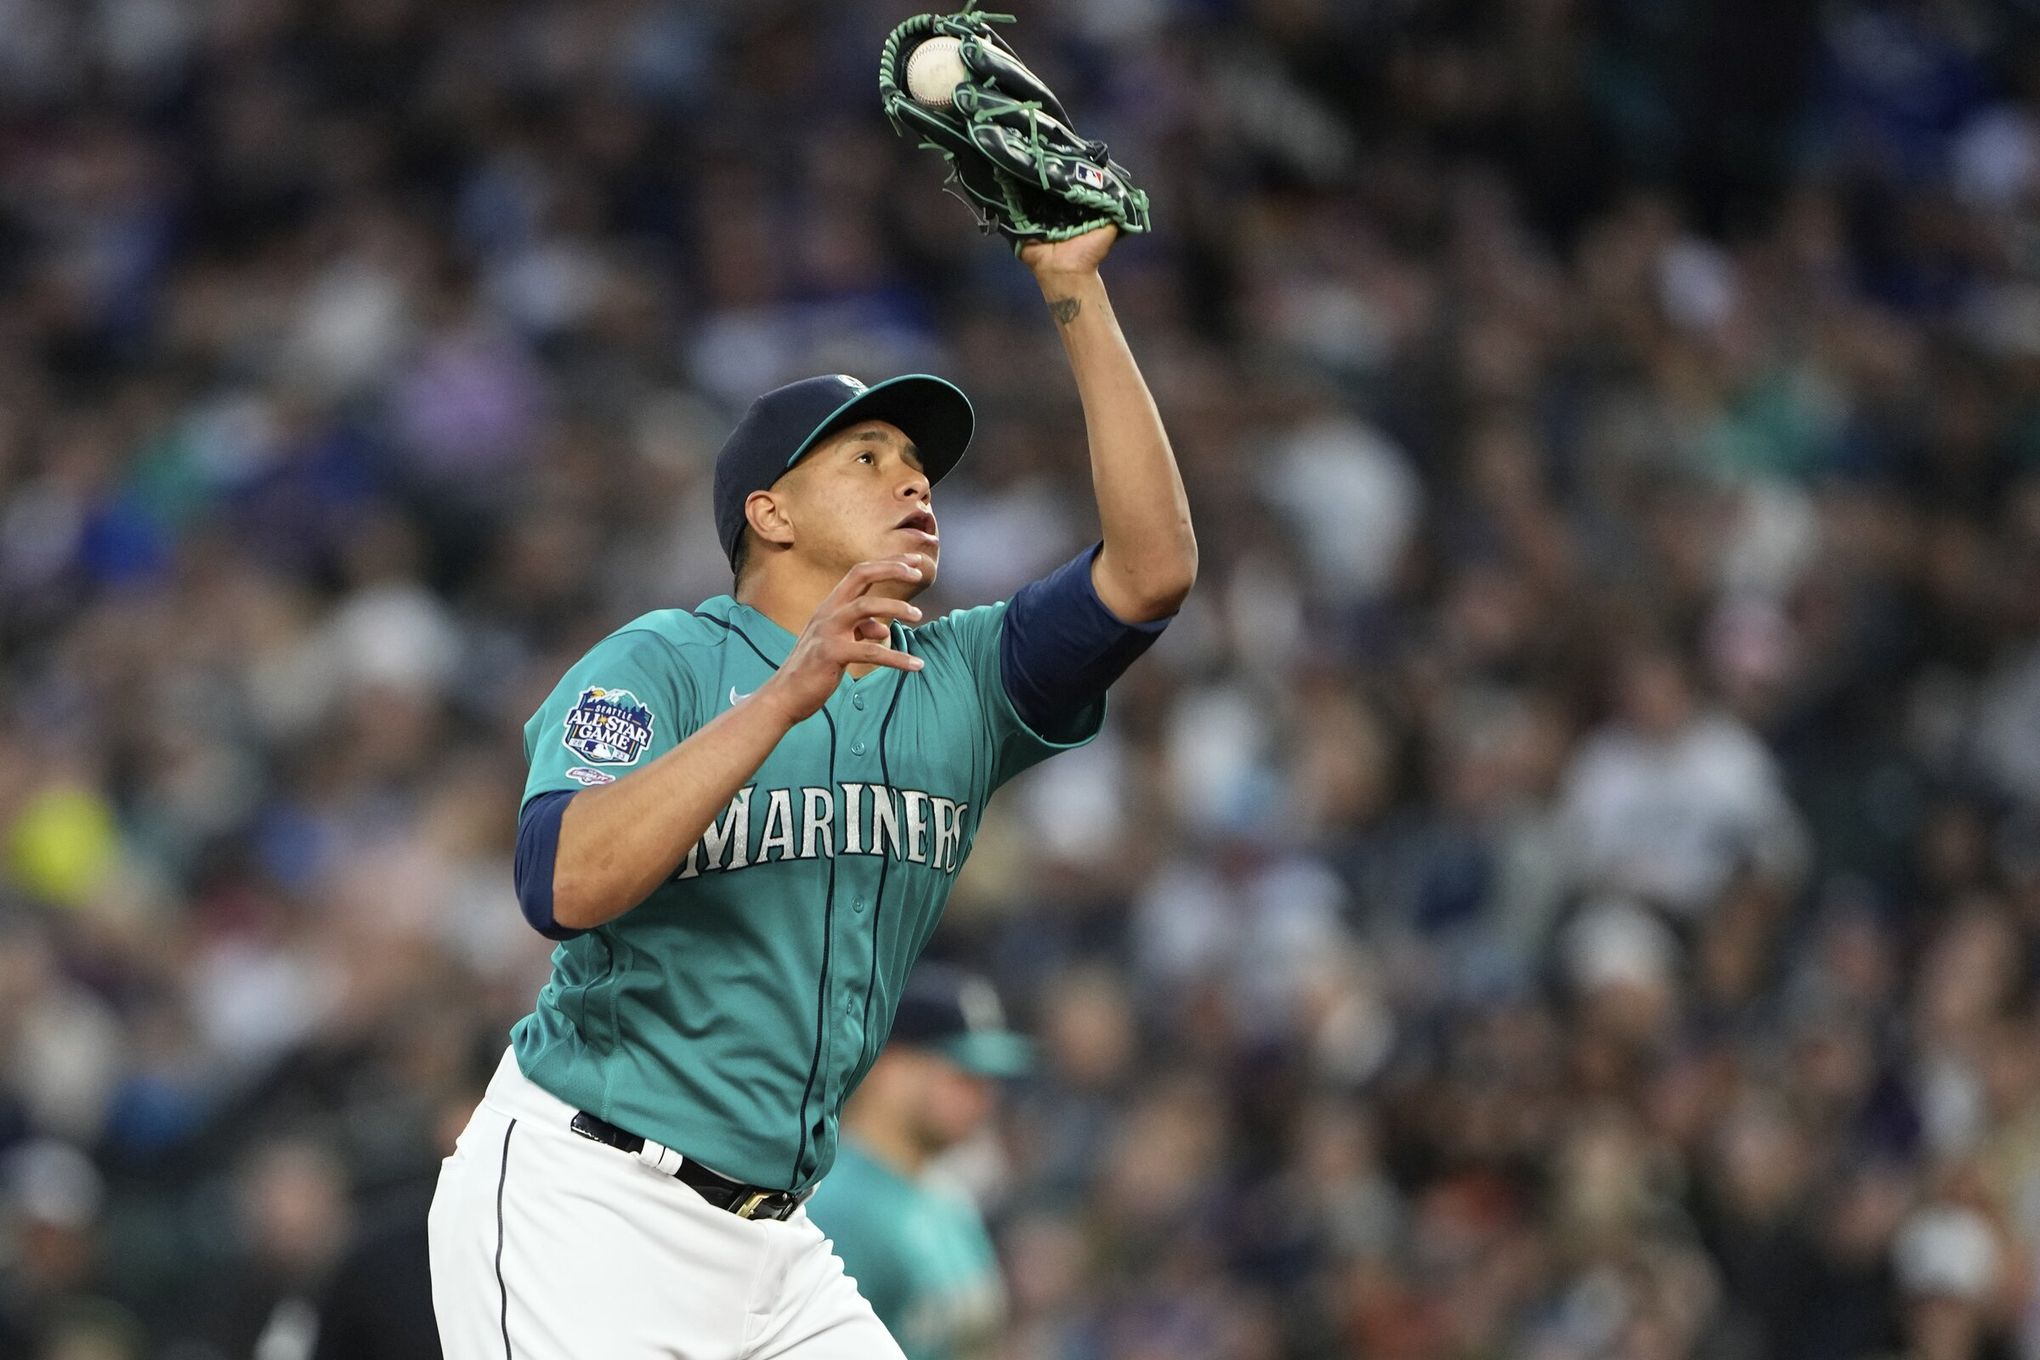 Mariners reliever Juan Then still on a high after 1-2-3 big-league